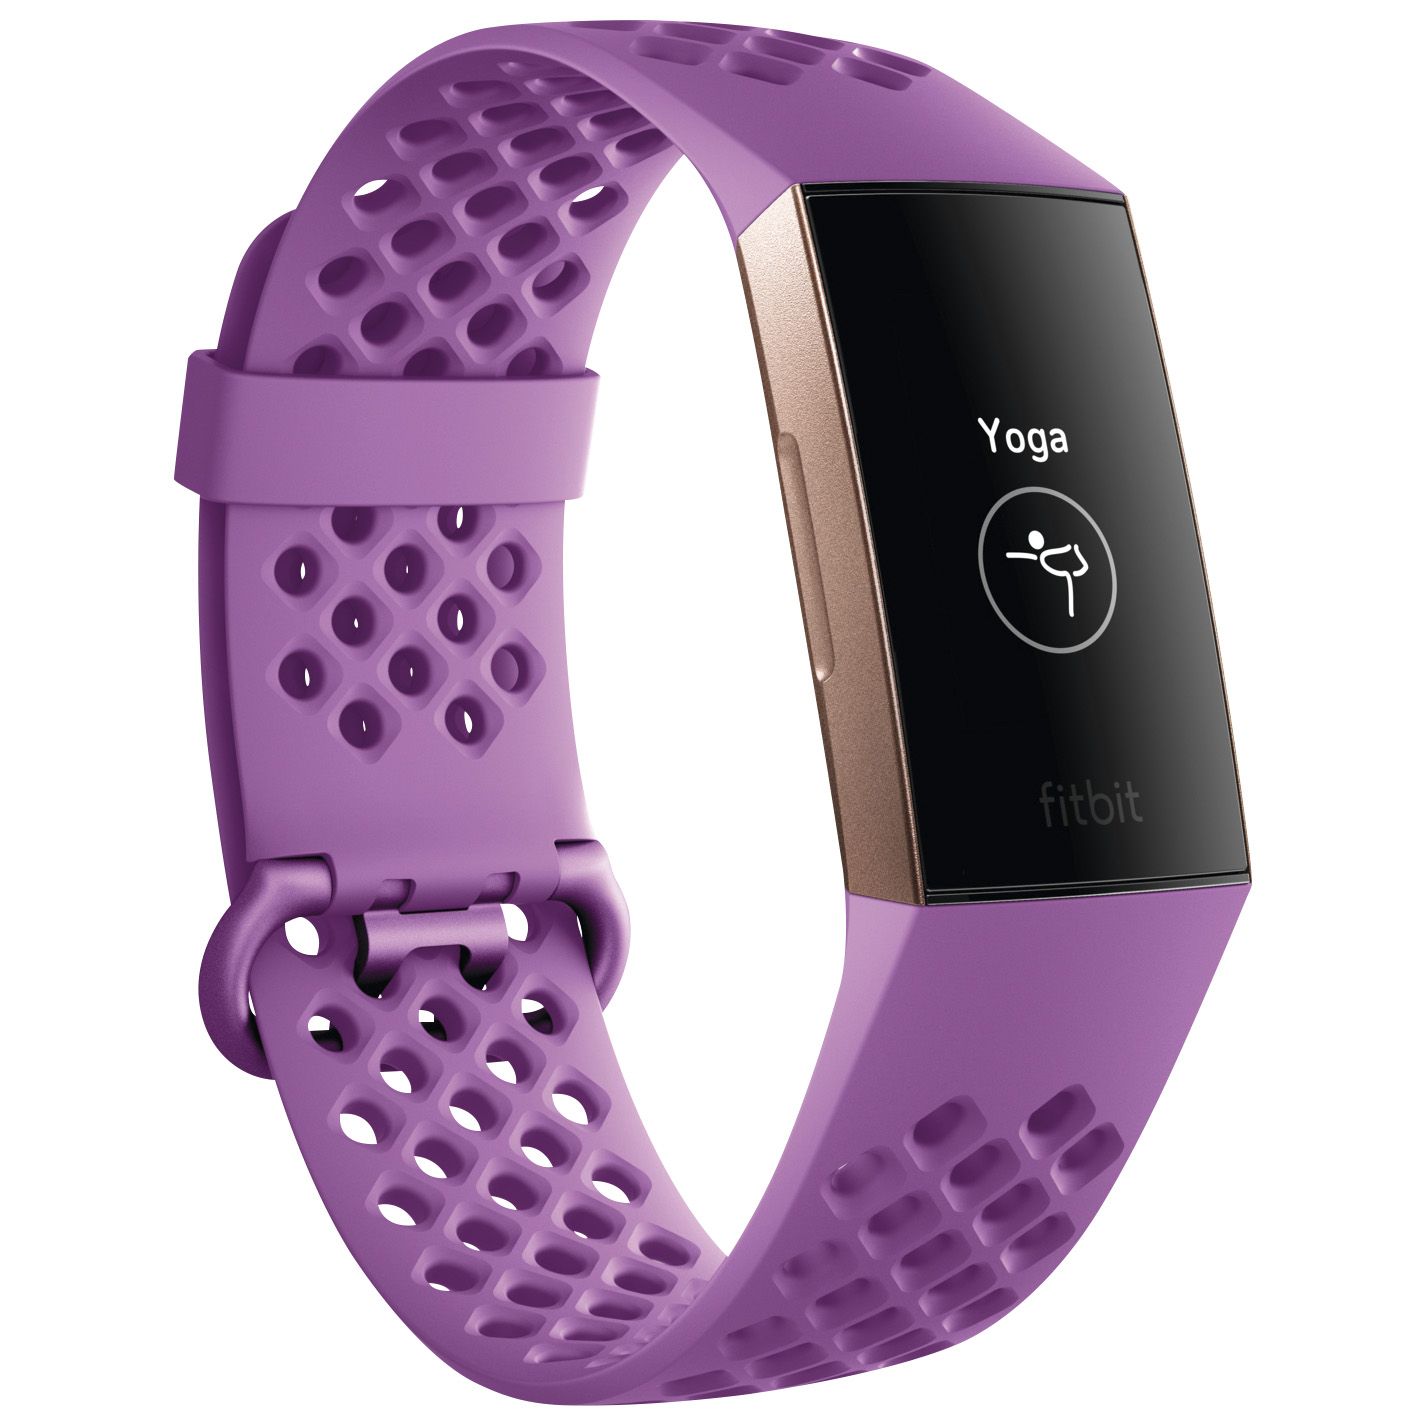 Size L Lavender for sale online Fitbit Charge 3 Special Edition Fitness Activity Tracker 